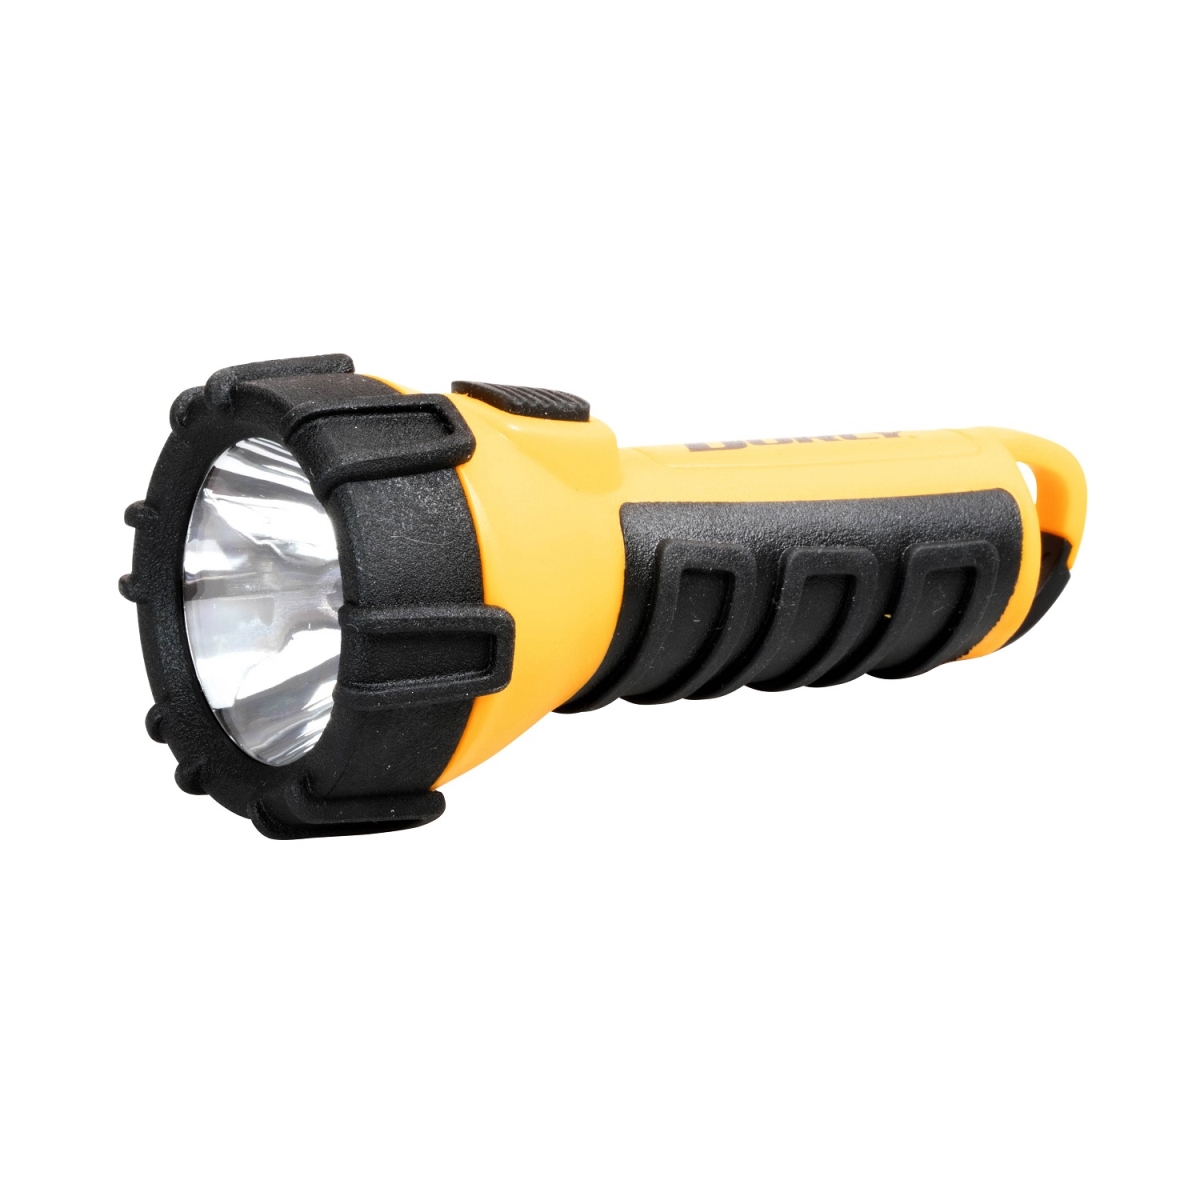 4019373 3aaa Led Floating Flashlight With Carabiner, Yellow